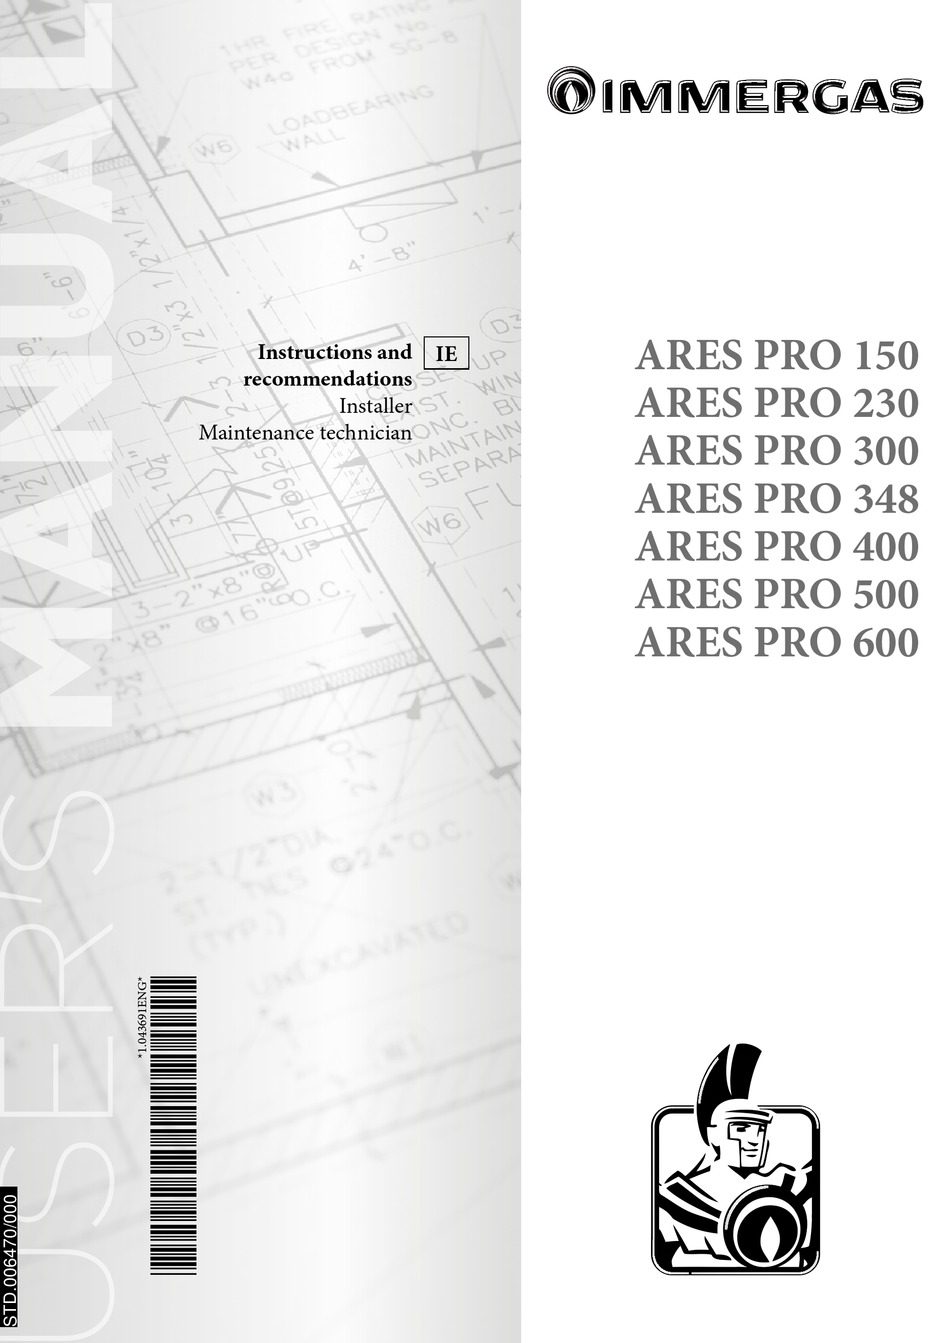 IMMERGAS ARES PRO 150 INSTRUCTIONS AND RECOMMENDATIONS Pdf Download .